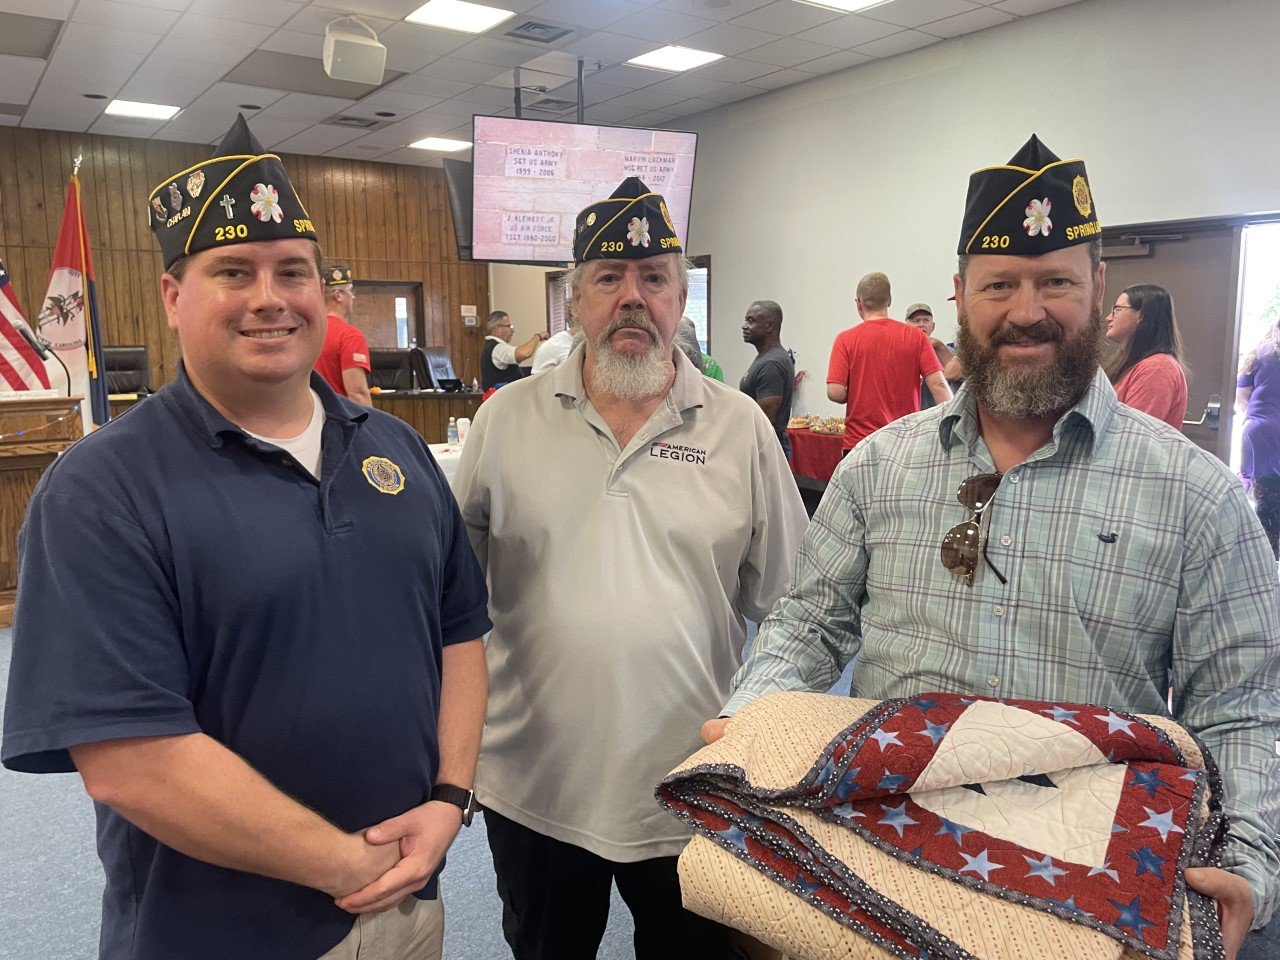 Chaplain Aaron Jeffers, Commander Armand Caron and first Vice Commander Derek Orent, members of American Legion Post 230, show a quilt that will be presented to retired Sgt. Maj. Charles L. Miller at a later date.